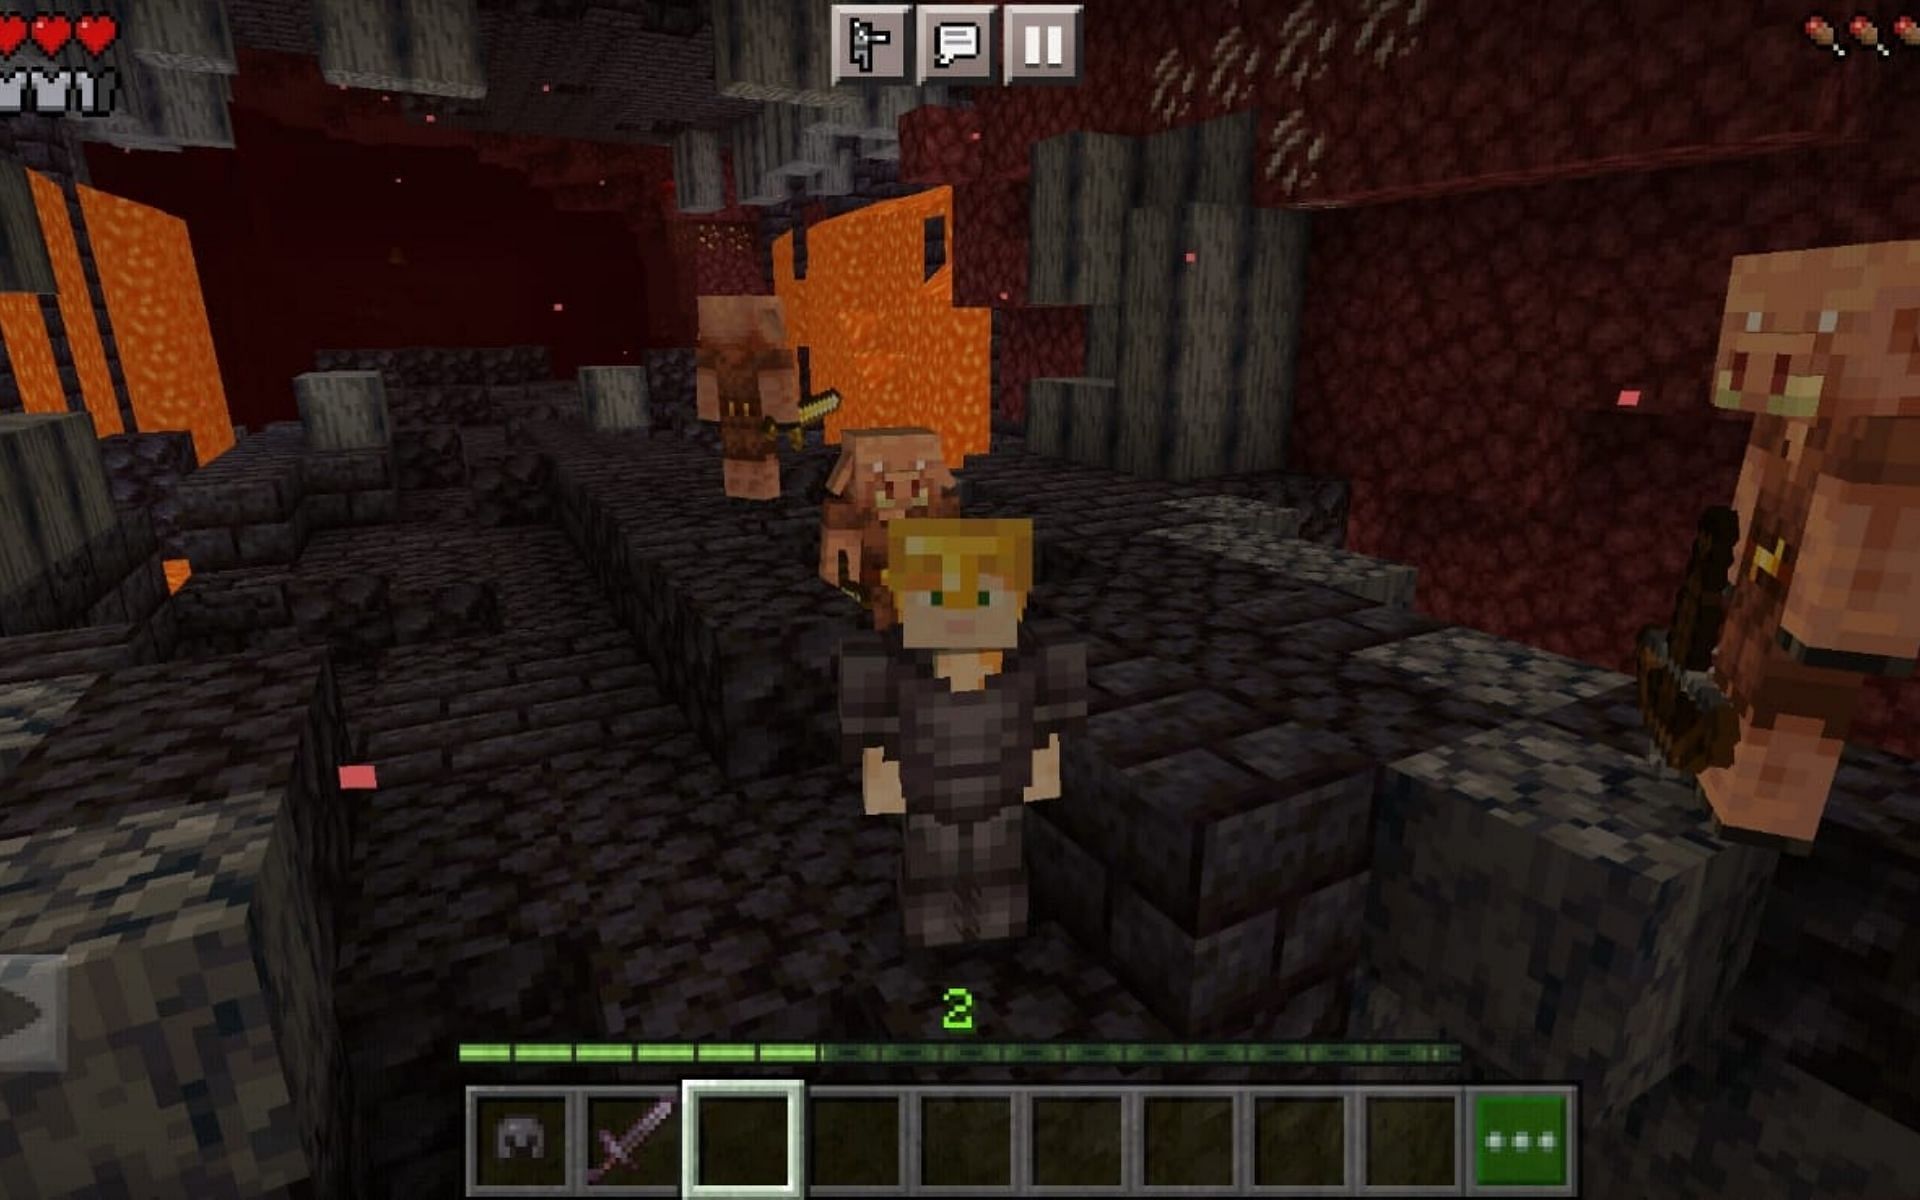 When wearing any gold armor piece, Piglins will not attack the players (Image via Minecraft)